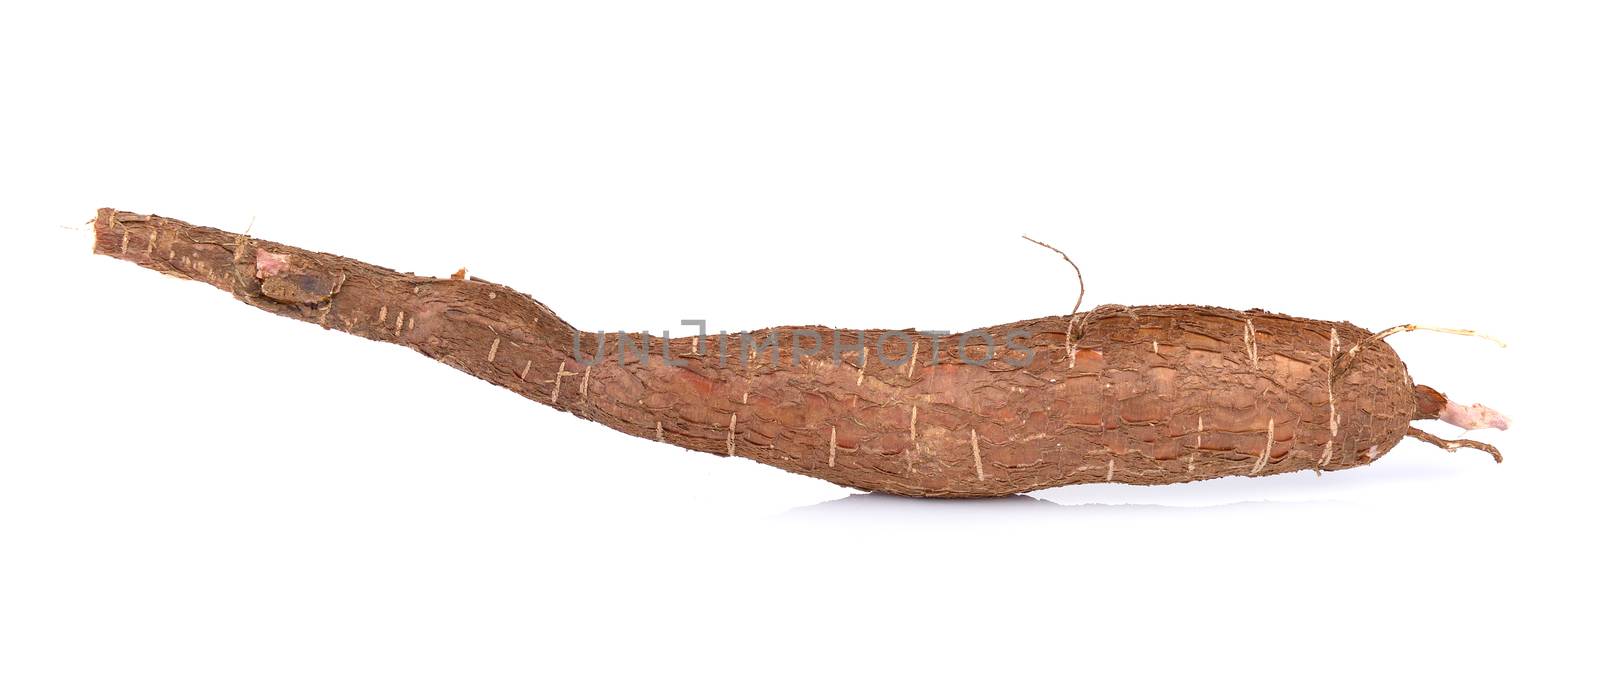 Cassava isolated on a white background